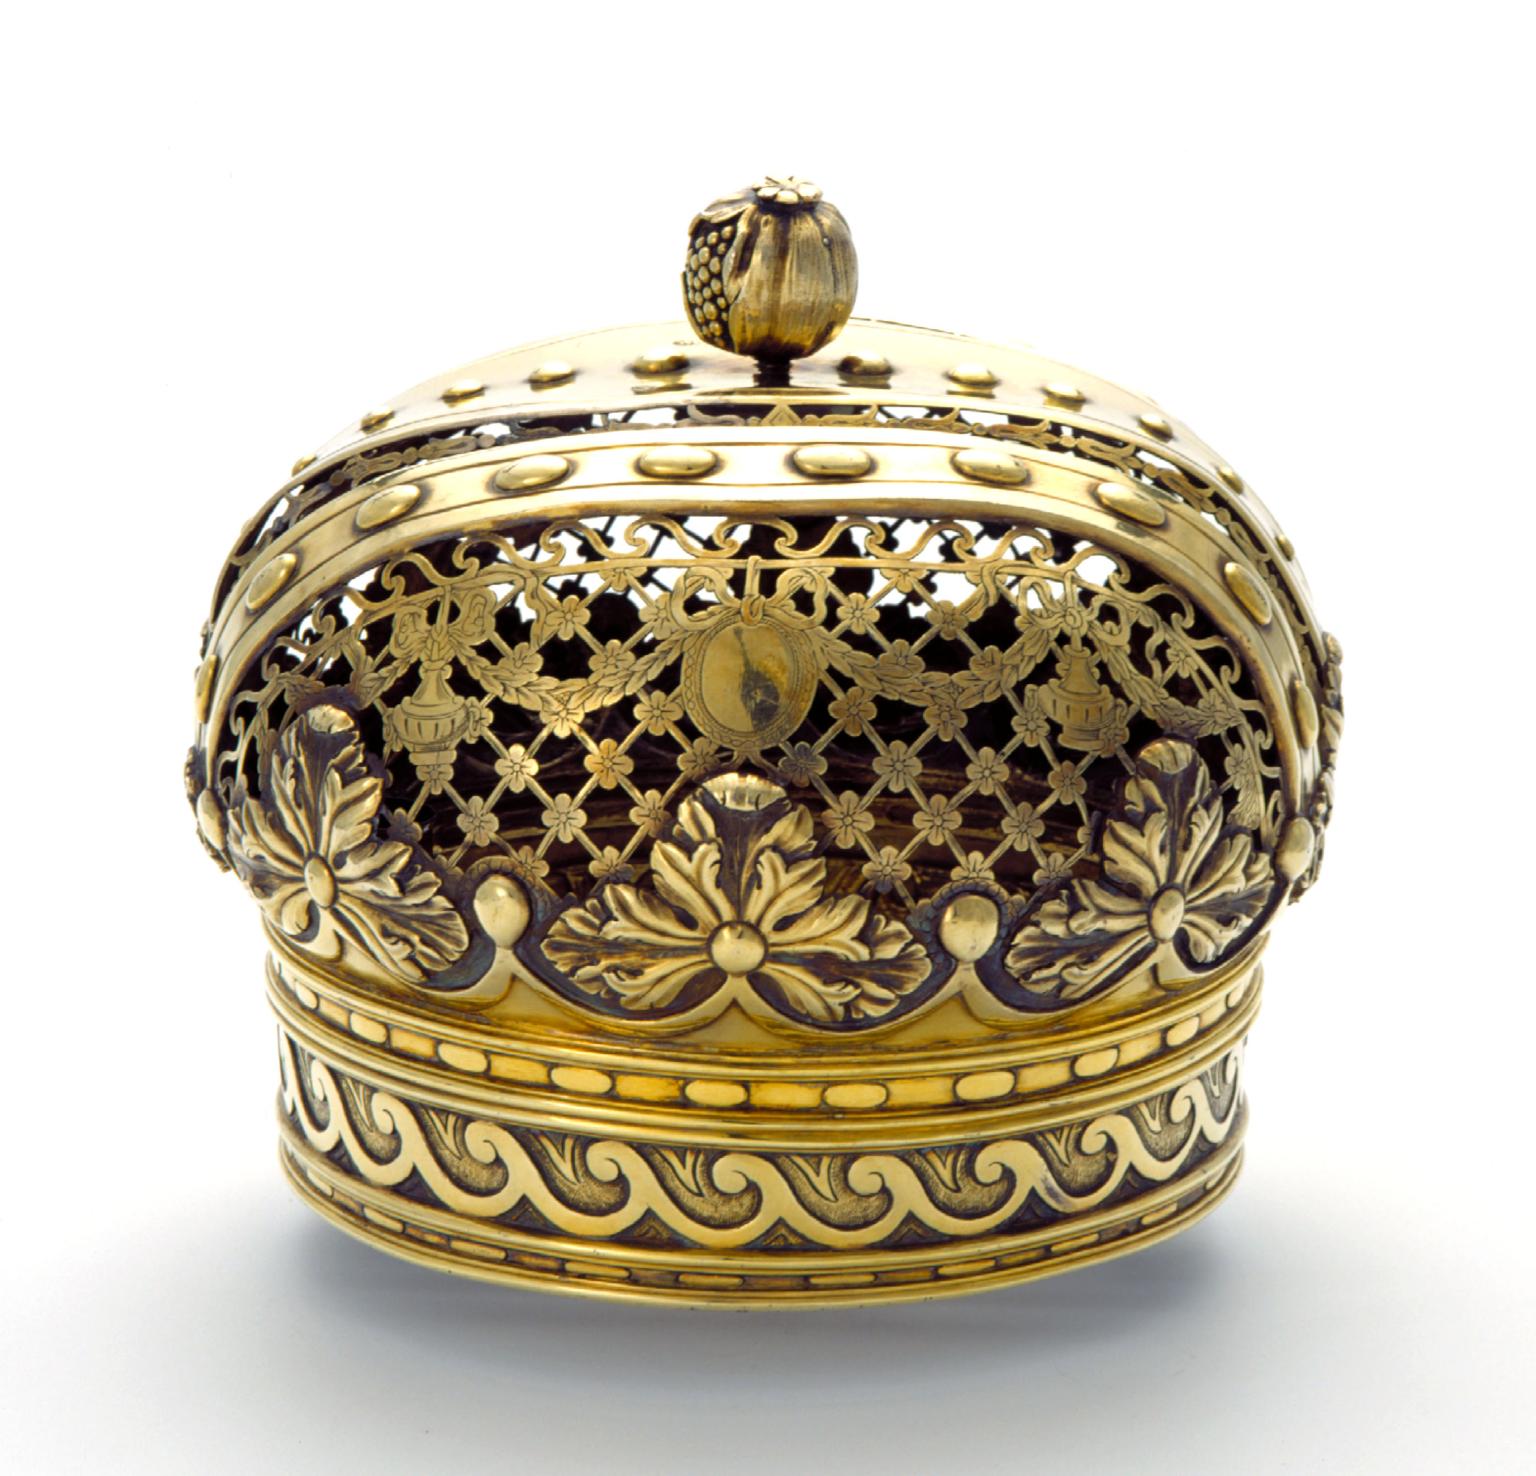 Gold crown decorated with floral motifs.